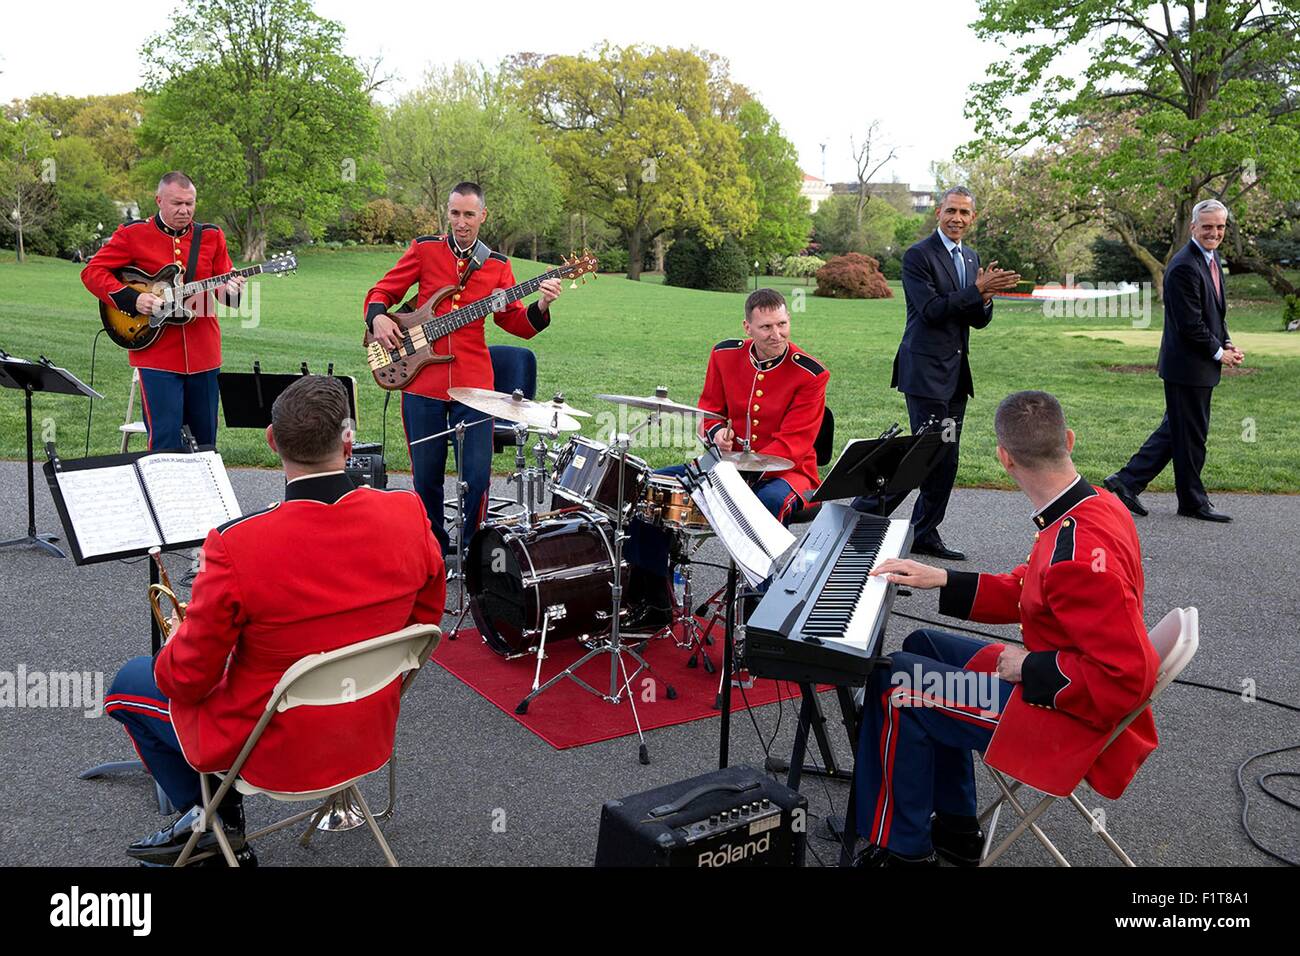 U.S. President Barack Obama and Chief of Staff Denis McDonough applaud the U.S. Marine Band Jazz Combo playing during a reception for the Medicare Sustainable Growth Rate in the Rose Garden of the White House April 21, 2015 in Washington, DC. Stock Photo